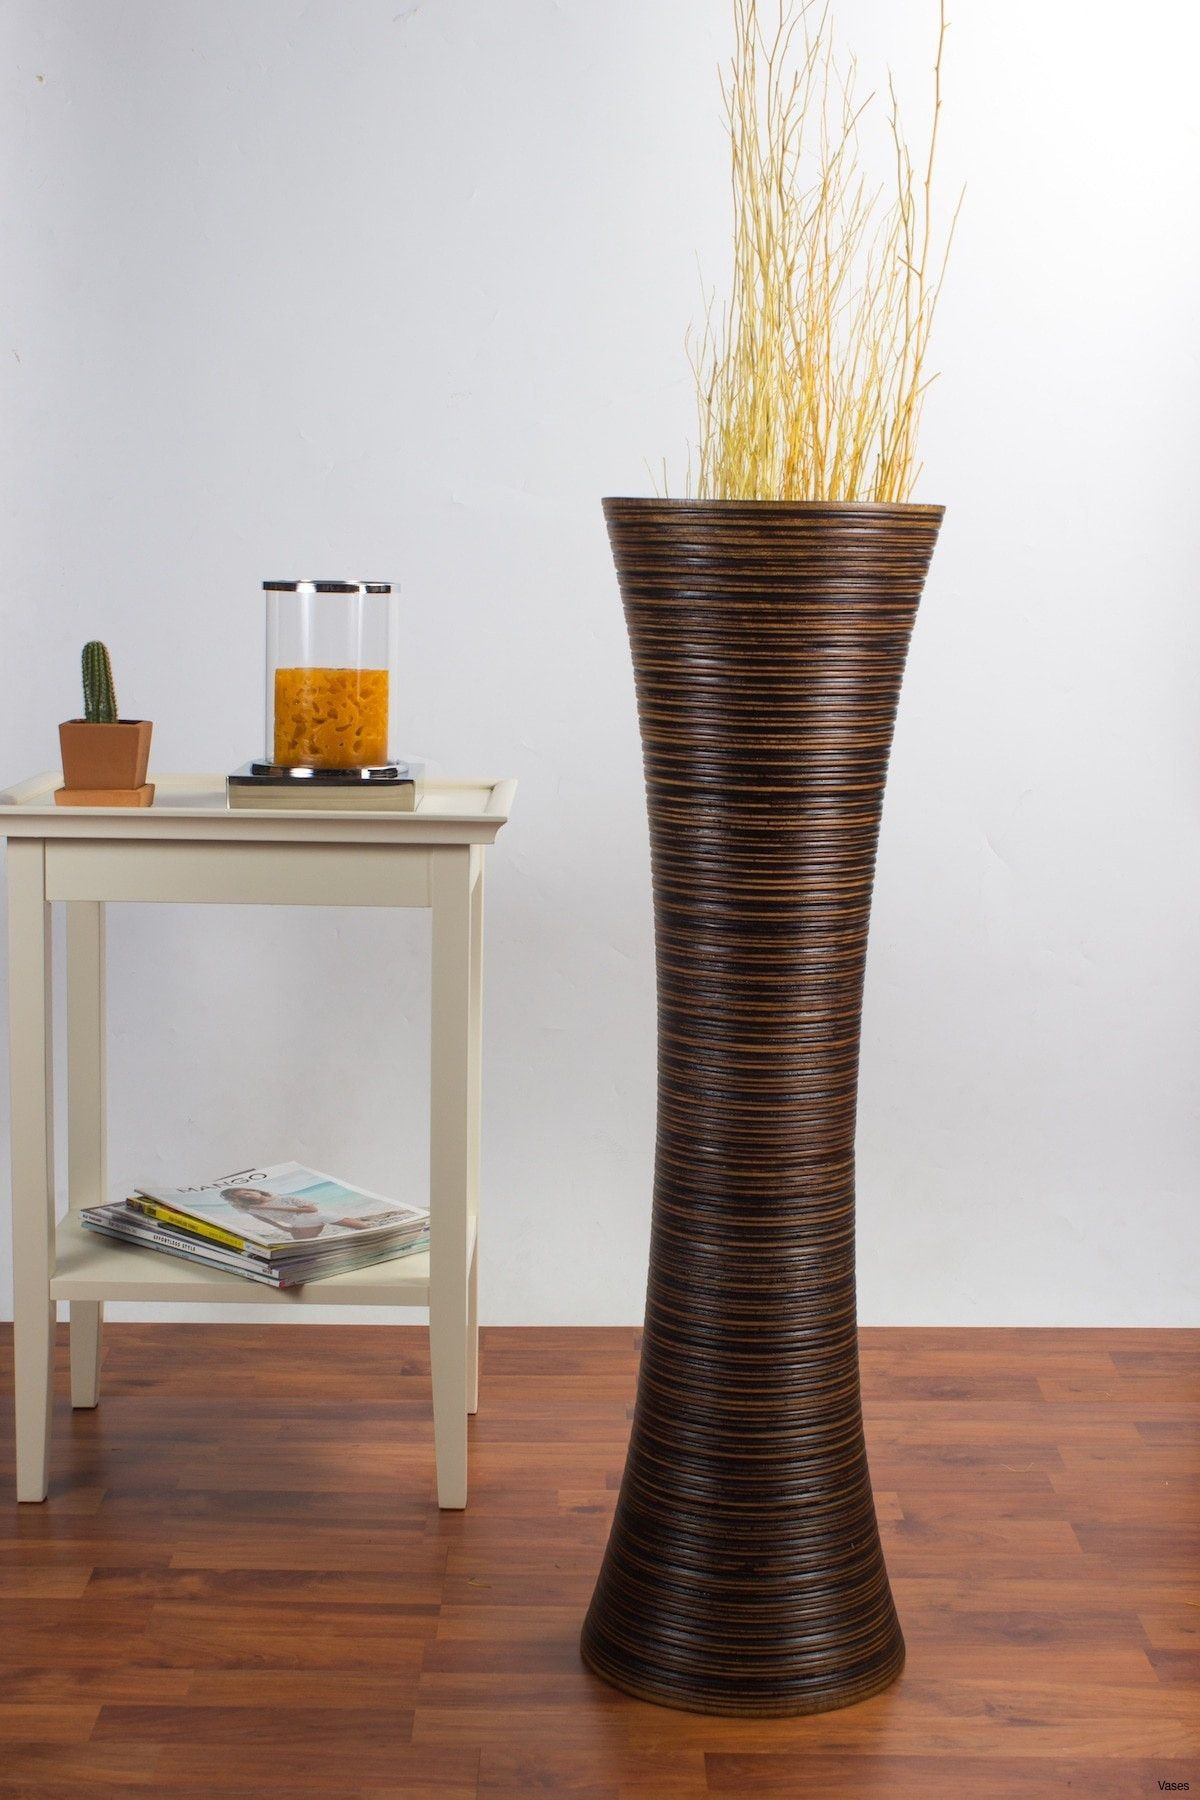 19 Popular Vases and Planters 2024 free download vases and planters of tall decorative vases luxury decorative floor vases fresh d dkbrw pertaining to tall decorative vases luxury decorative floor vases fresh d dkbrw 5749 1h vases tall bro